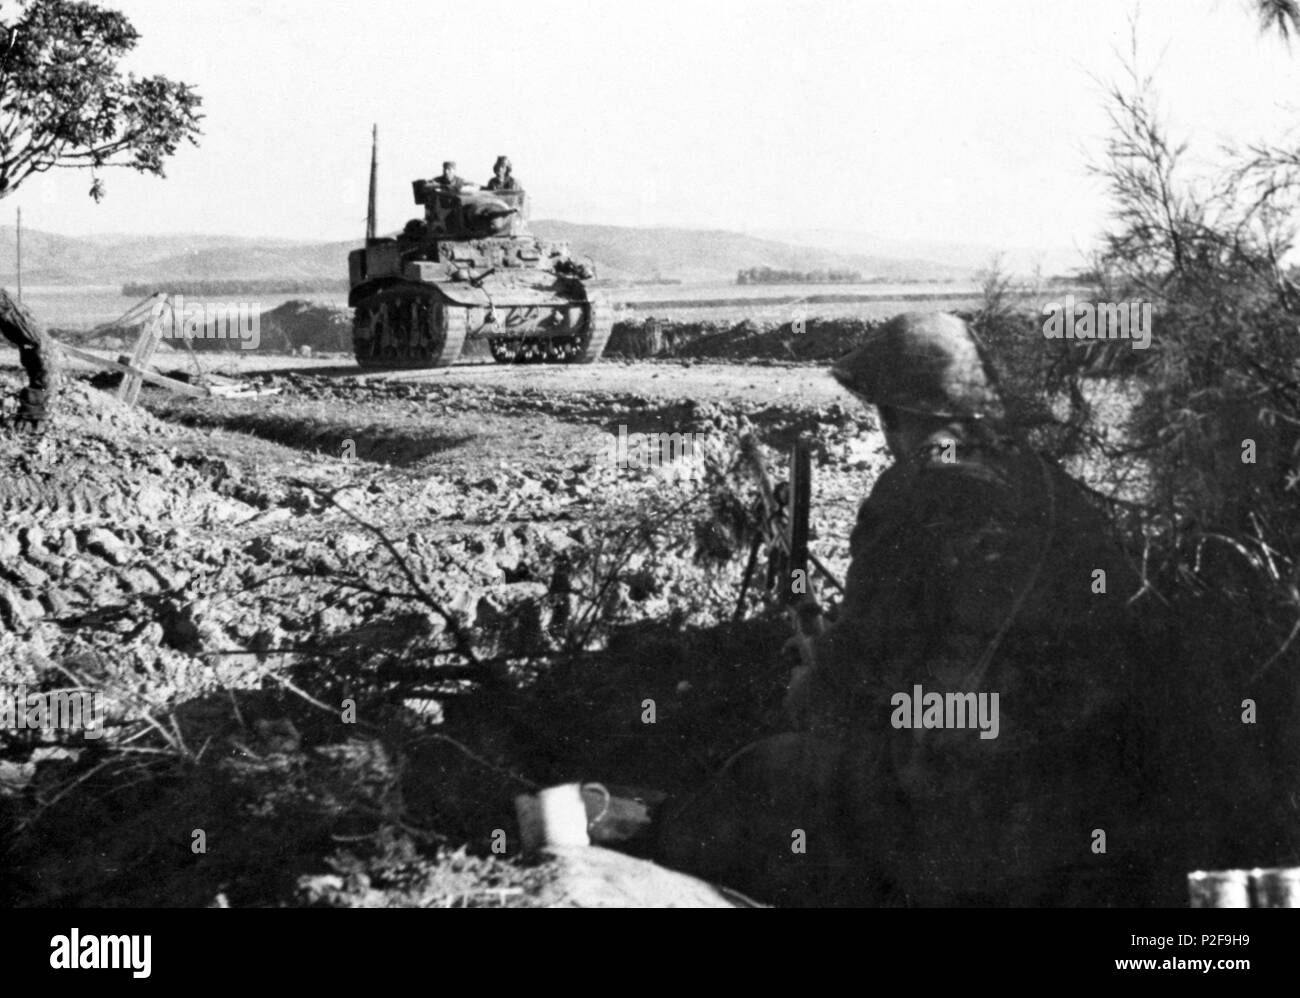 American light tank returning after the battle. Bren gunner in fore ground is covering the road. WWII, December 1942. Stock Photo